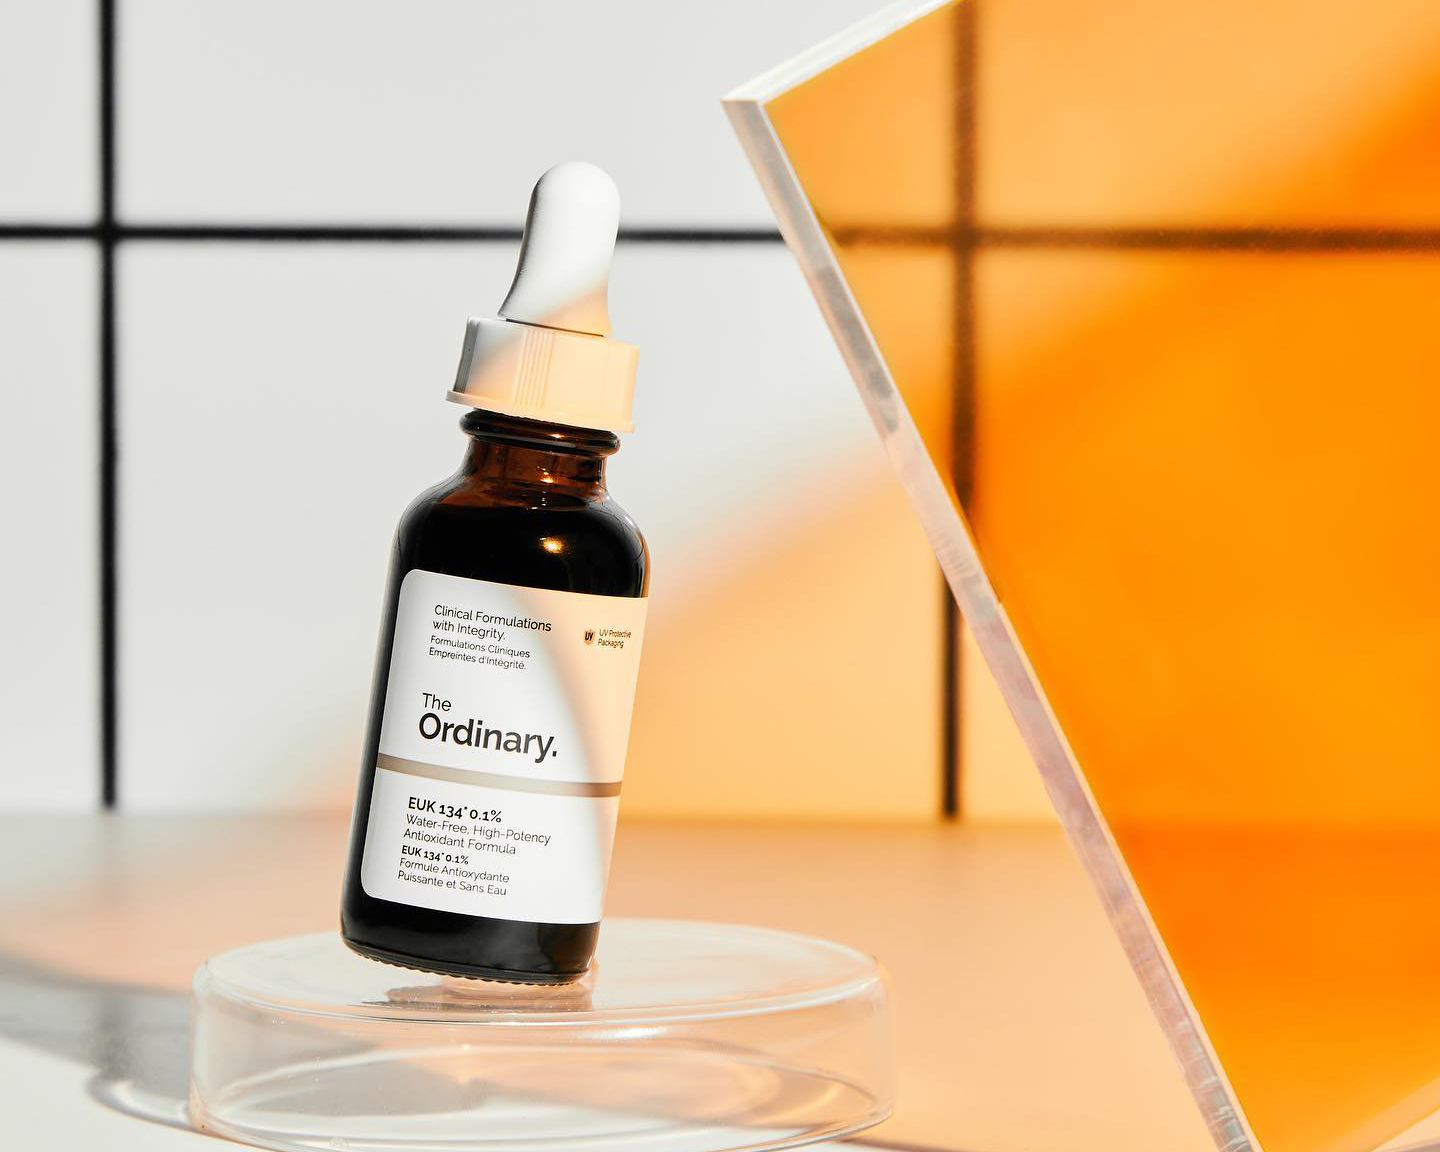 A bottle of .2% from the Ordinary, one of the best skincare brands available in NZ.